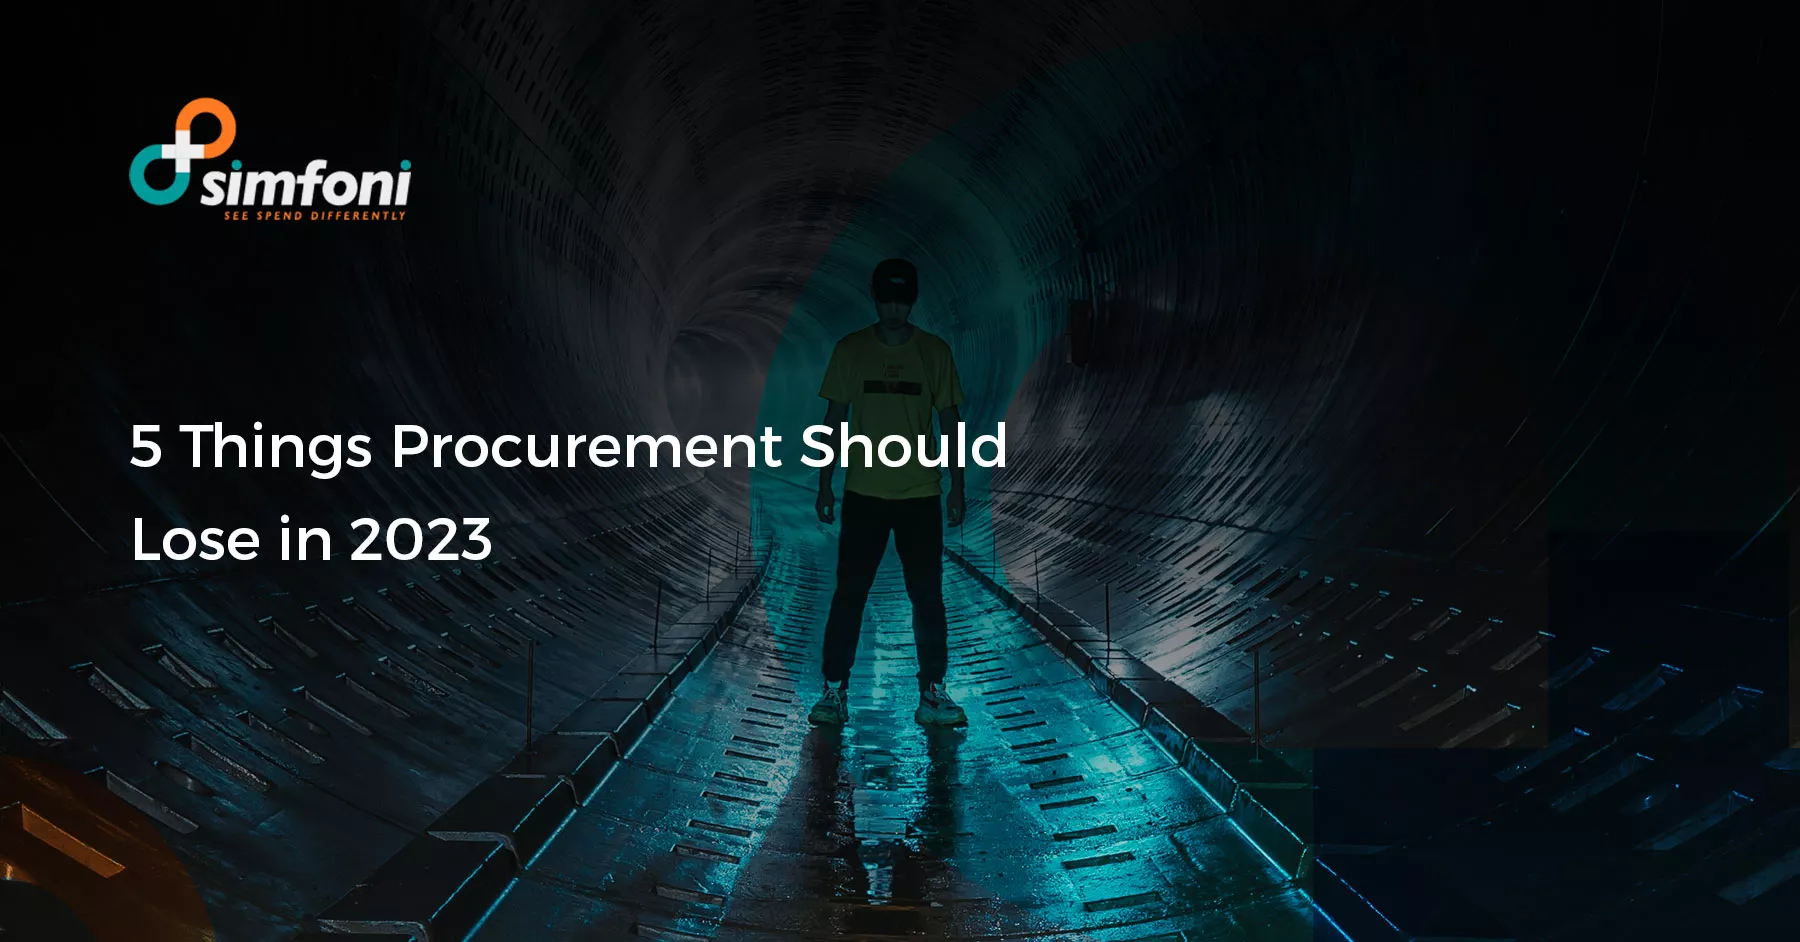 5 Things Procurement Should Lose in 2023